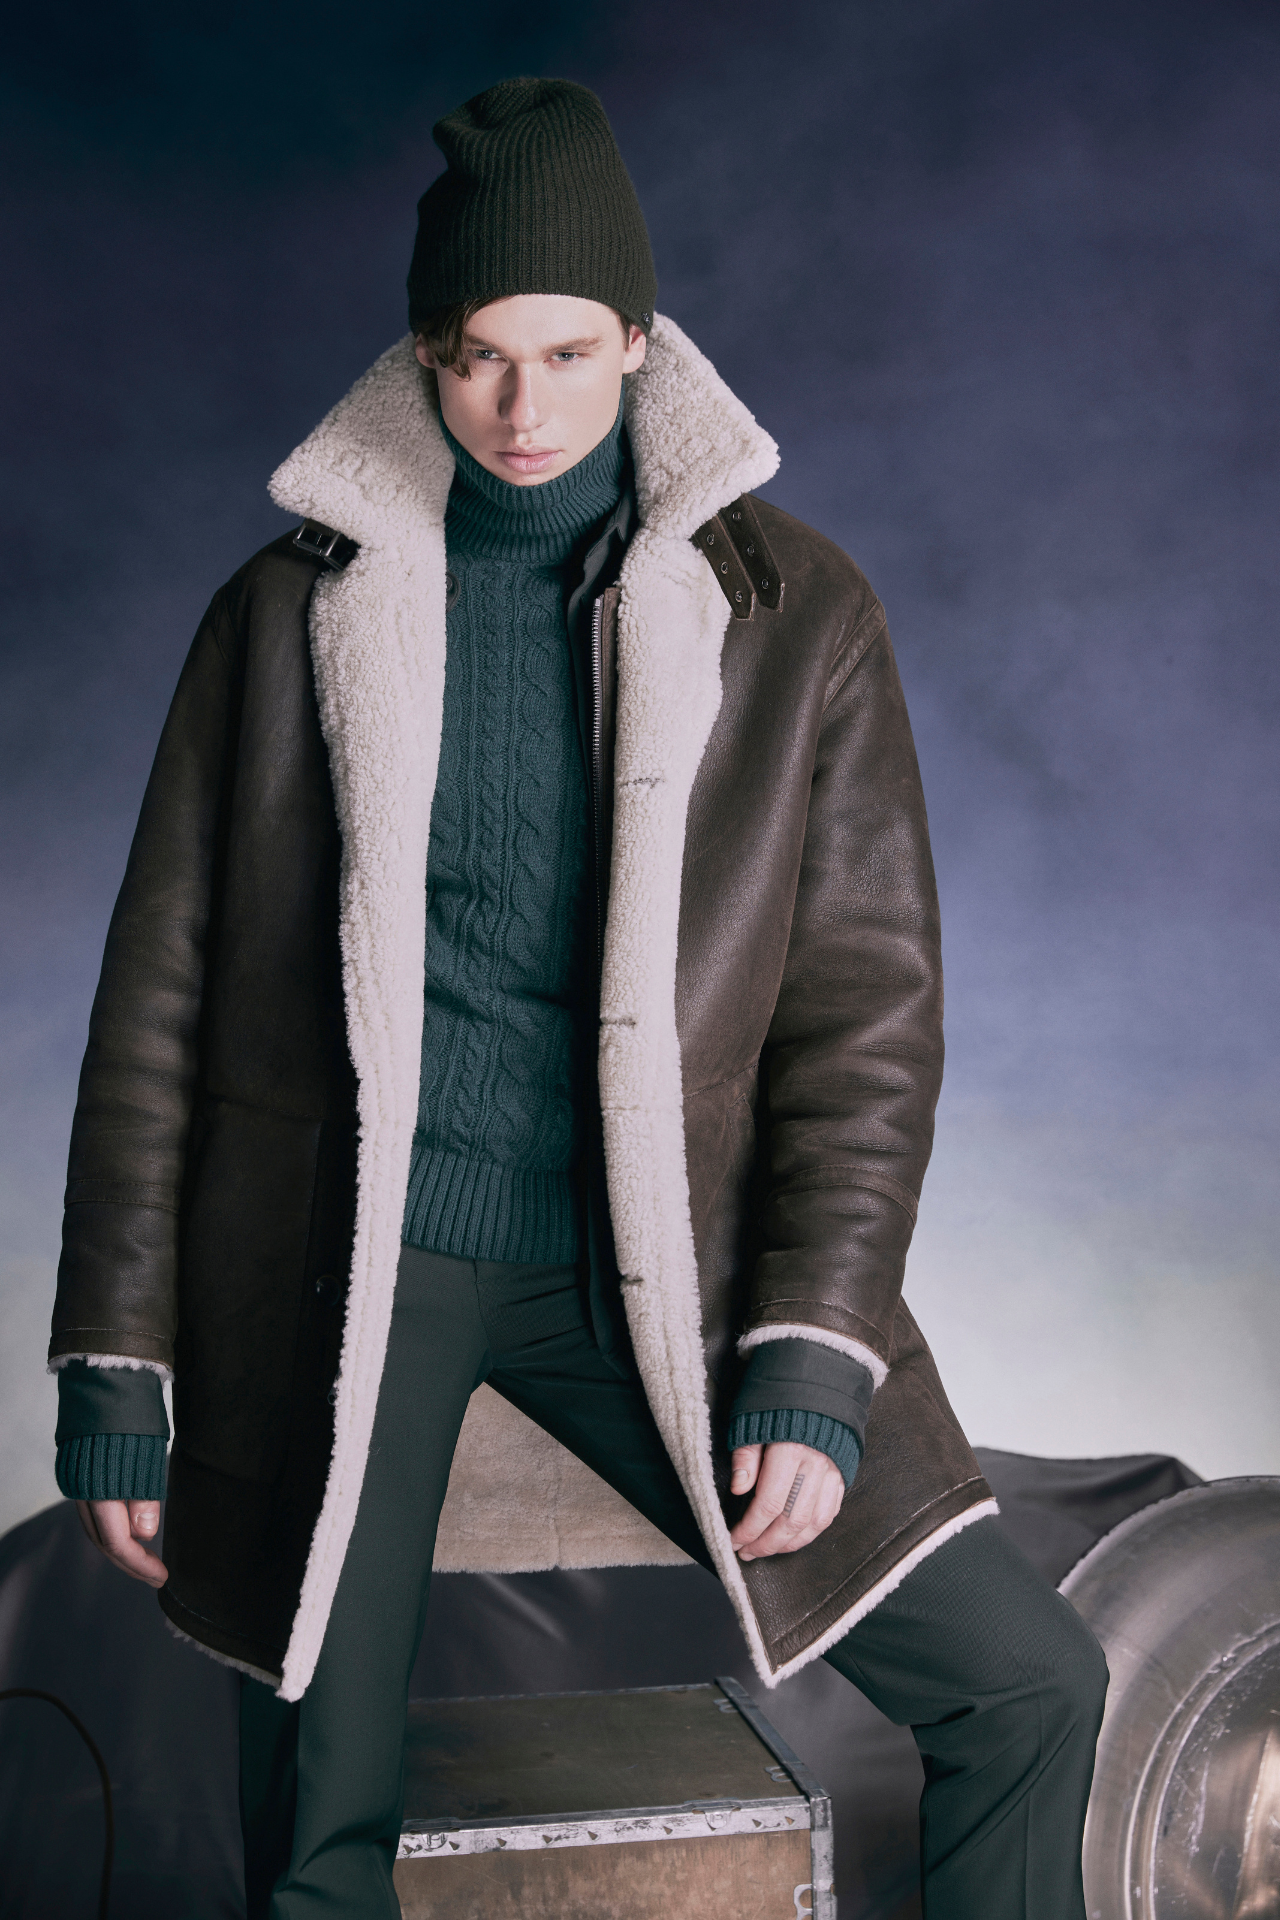 Explore winter in style with Chance, our designer mens shearling in arabica nappa coat. Reversible to a cozy curly wool teddy, it's warm and versatile. True to size, it fits comfortably with a loose fit through the torso and fits snugly across the shoulders. This 37" inch coat features a zip closure, 3-button closure, notch collar, and practical slash and patch pockets. 